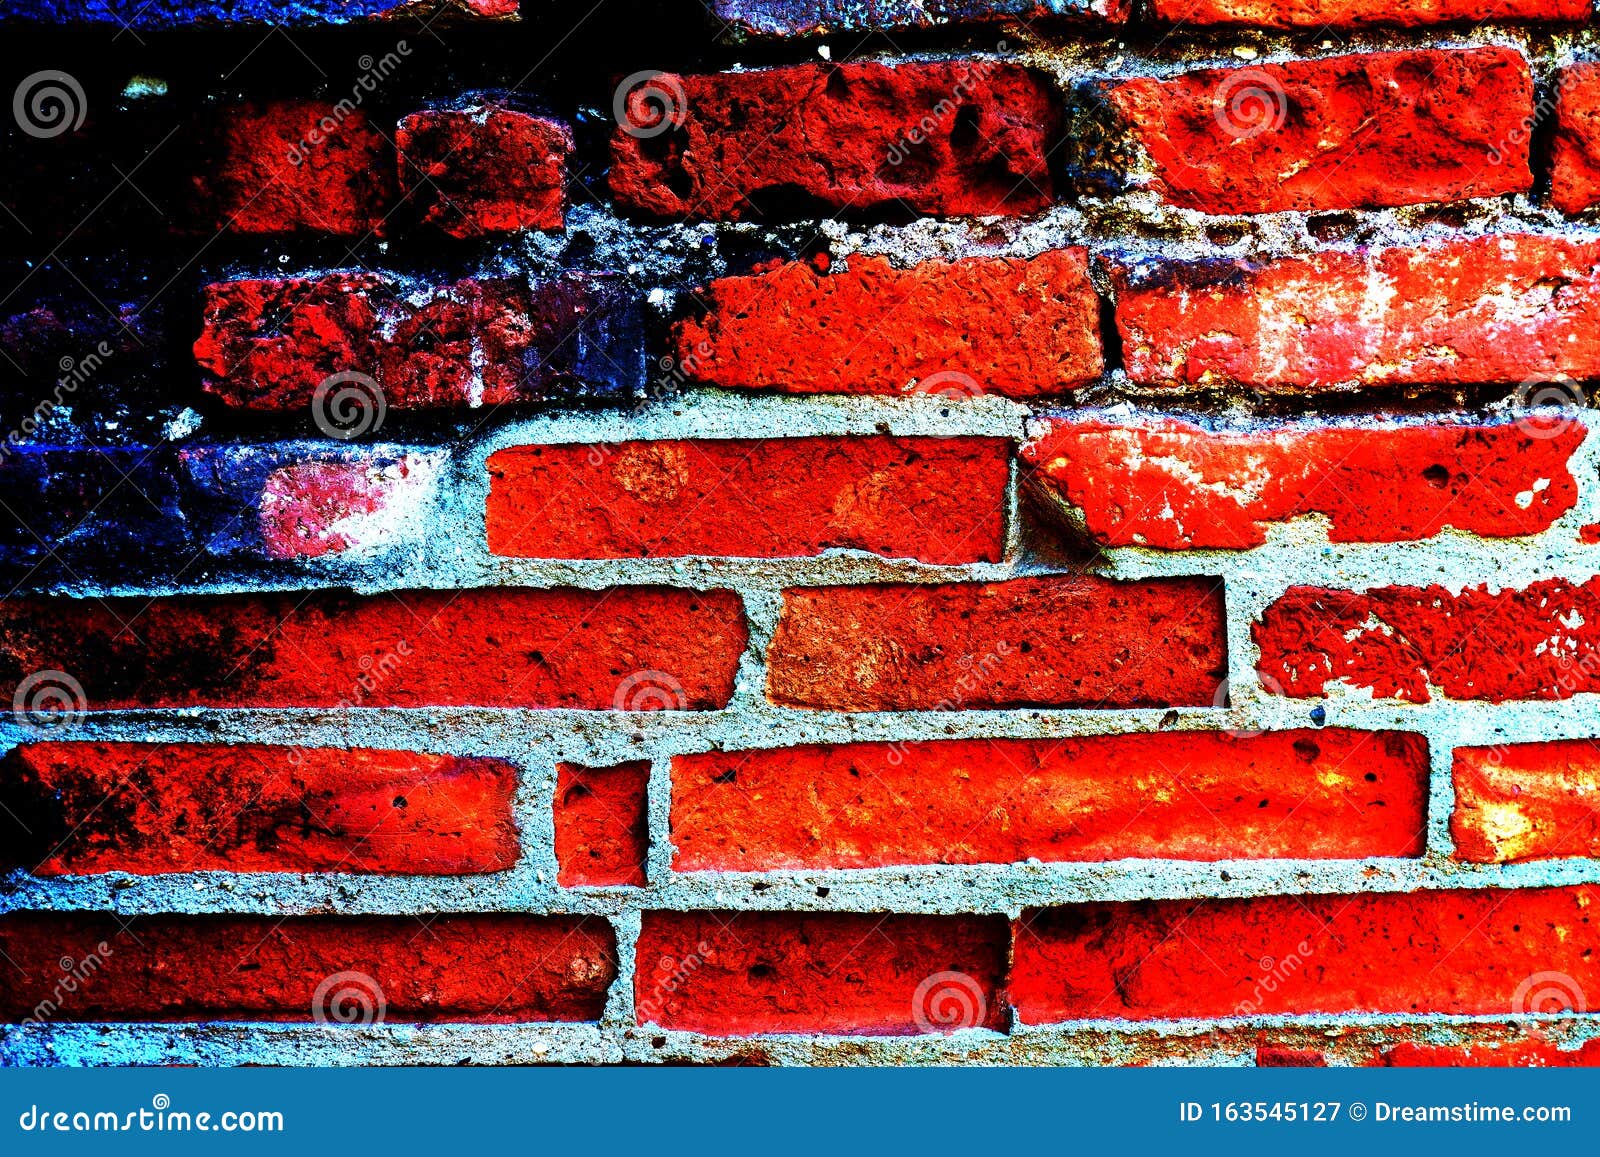 Old Brick Wallpaper and Texture Wall Stock Image - Image of construction,  aged: 163545127